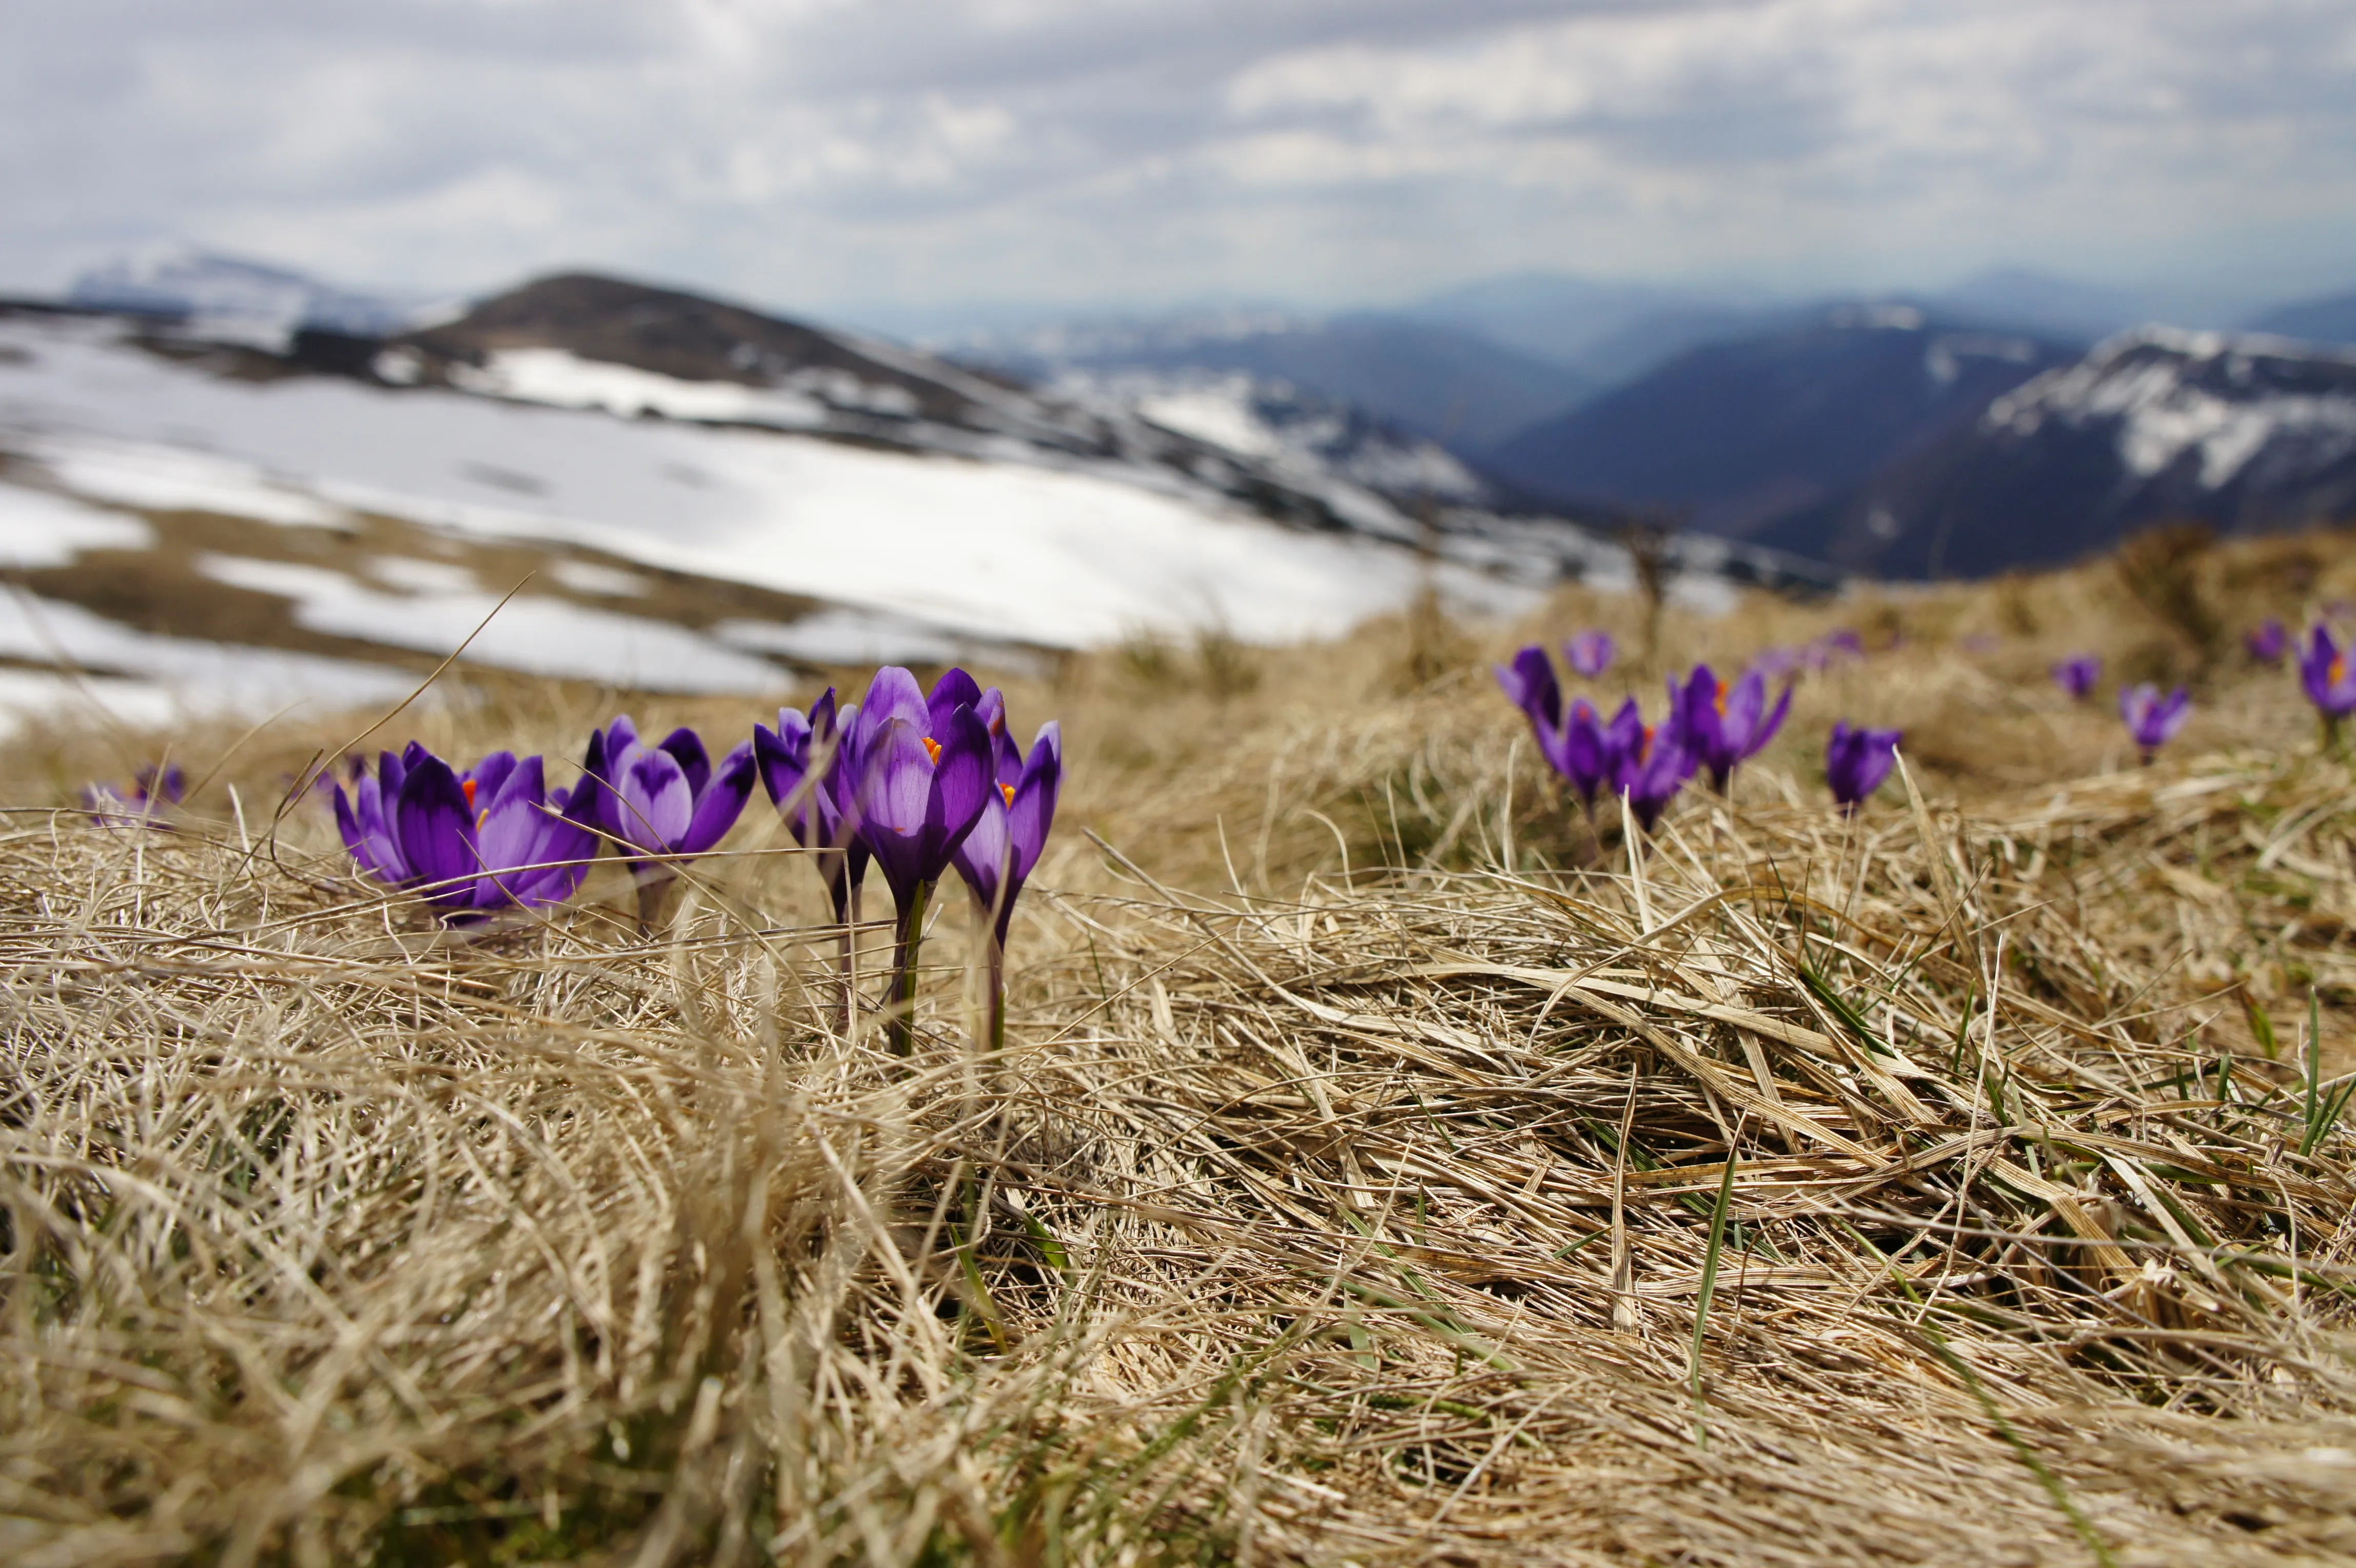 Let Lent bring a spiritual Spring - By Russell Shaw